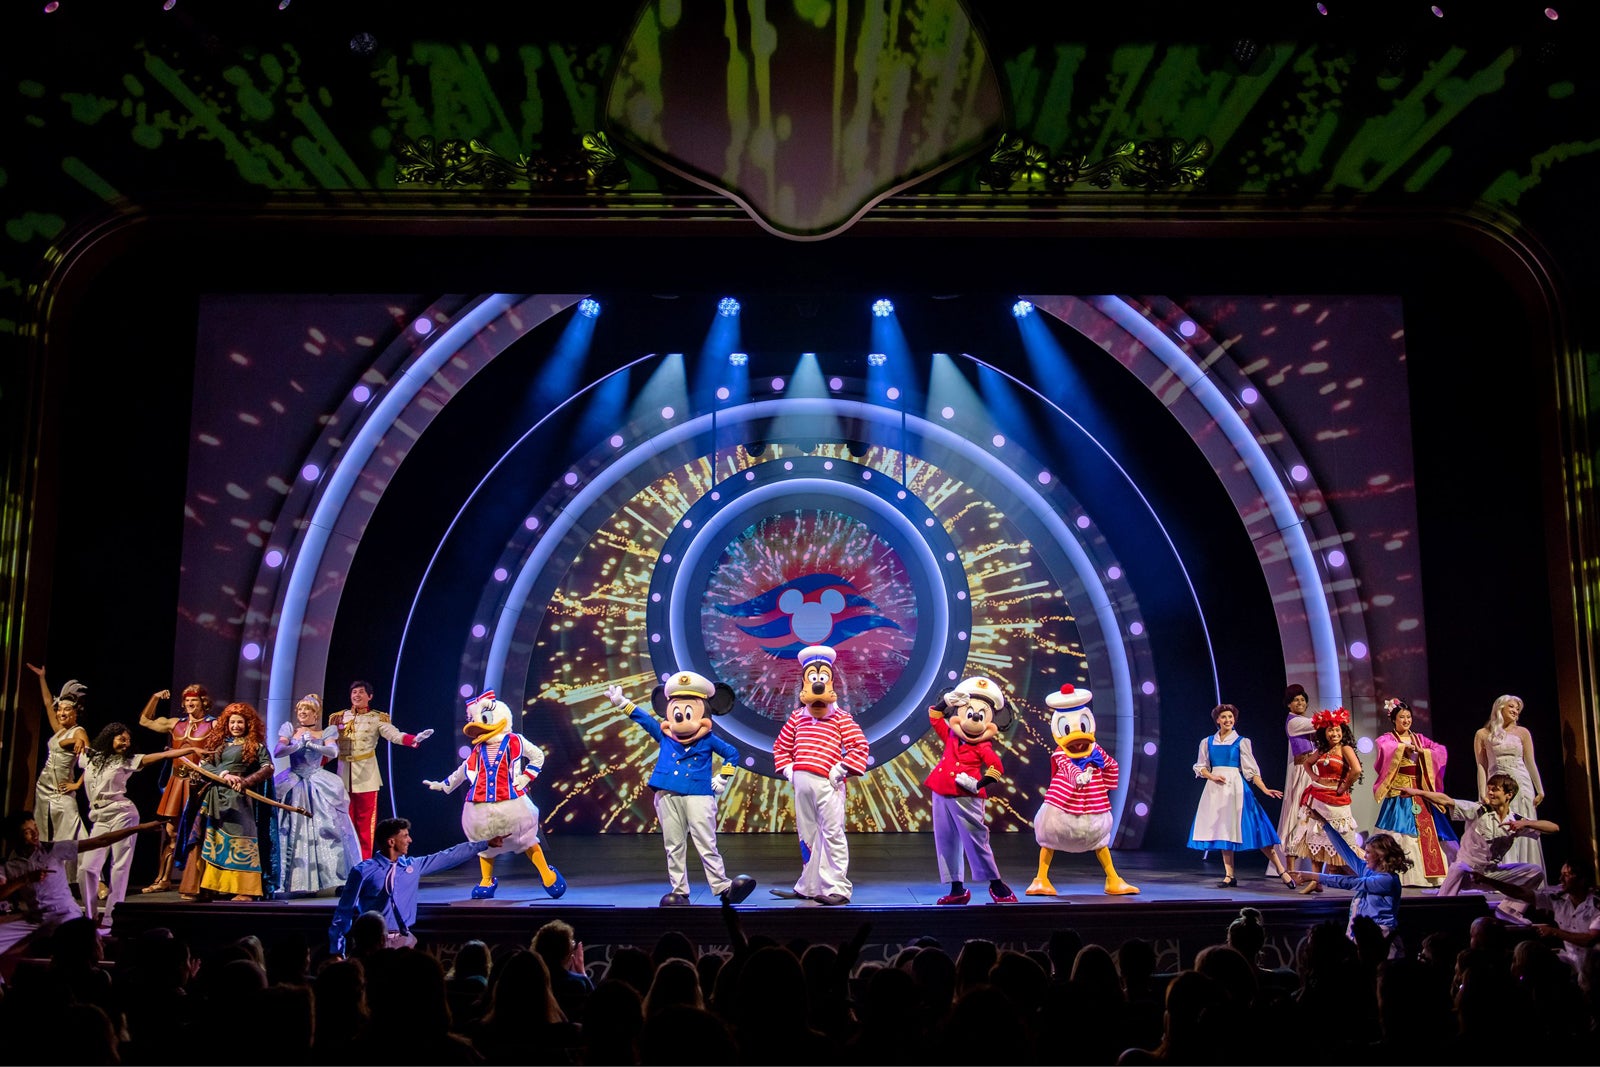 Disney characters and prince and princesses perform onstage.